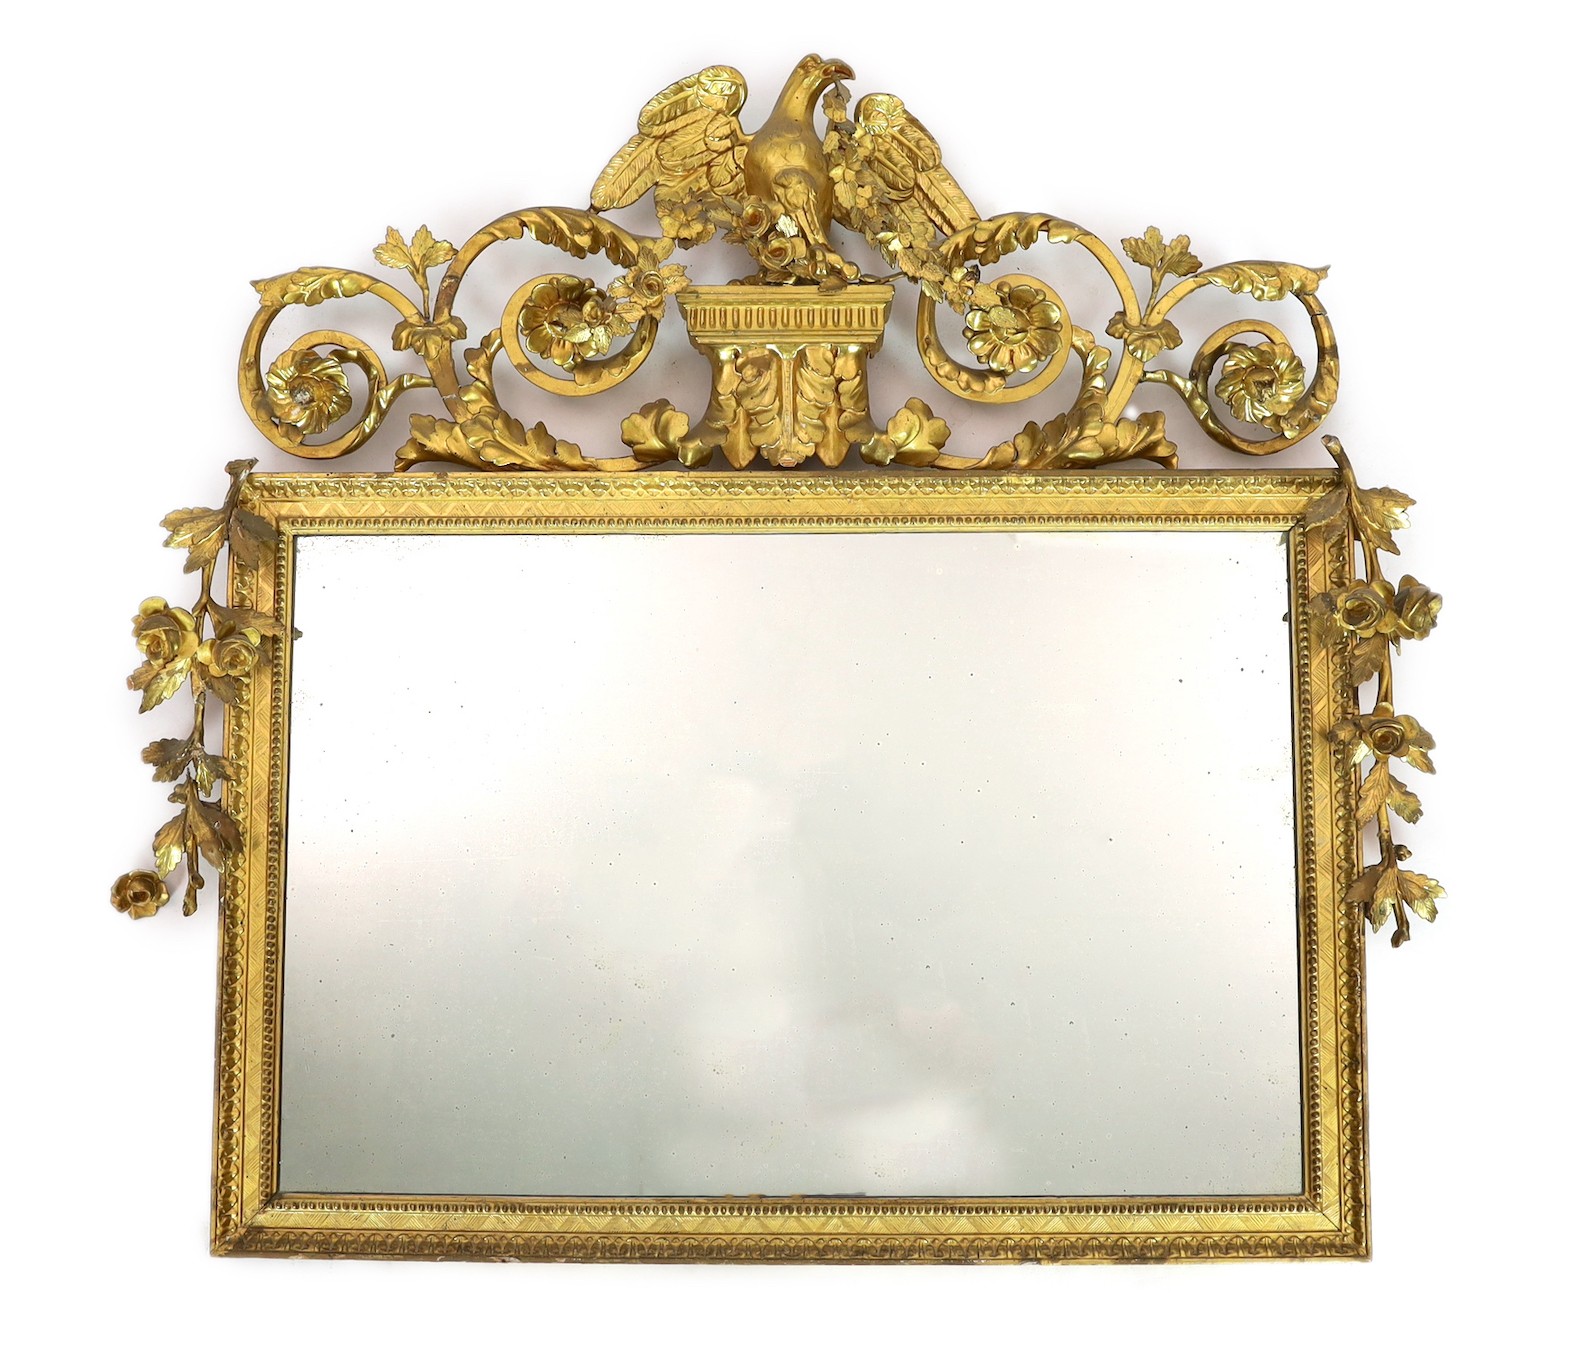 A 19th century century carved giltwood wall mirror, with elaborate ornate eagle and flowering swag